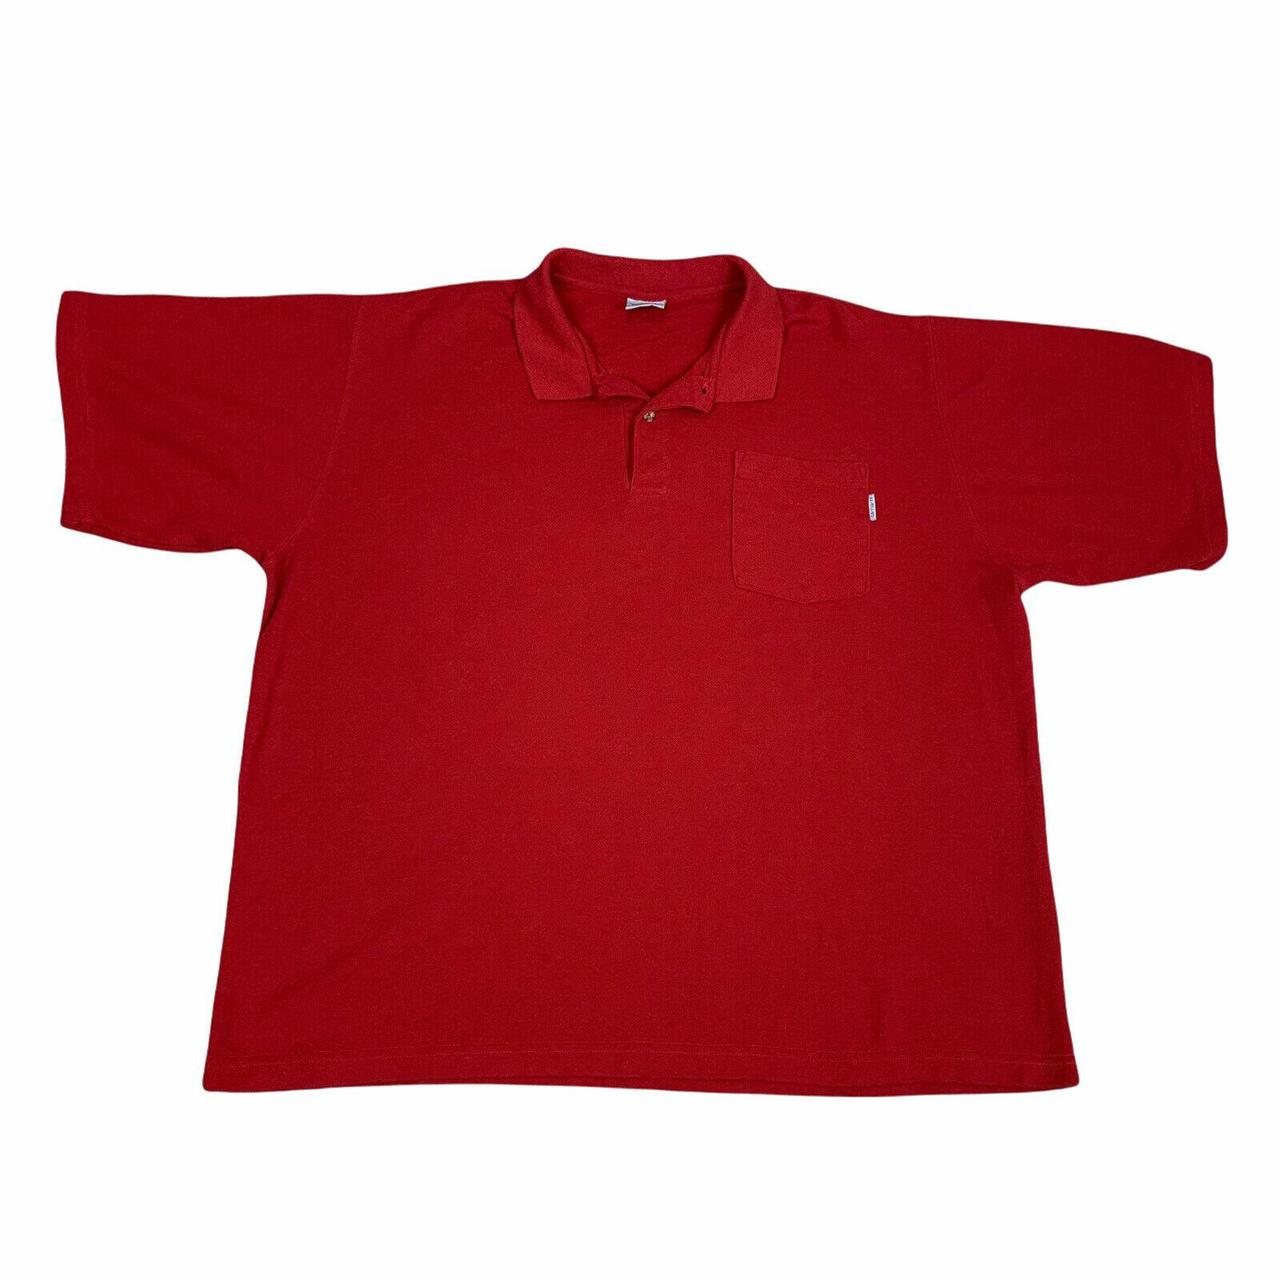 Carhartt Polo Shirt Mens Extra Large Red Outdoor... - Depop